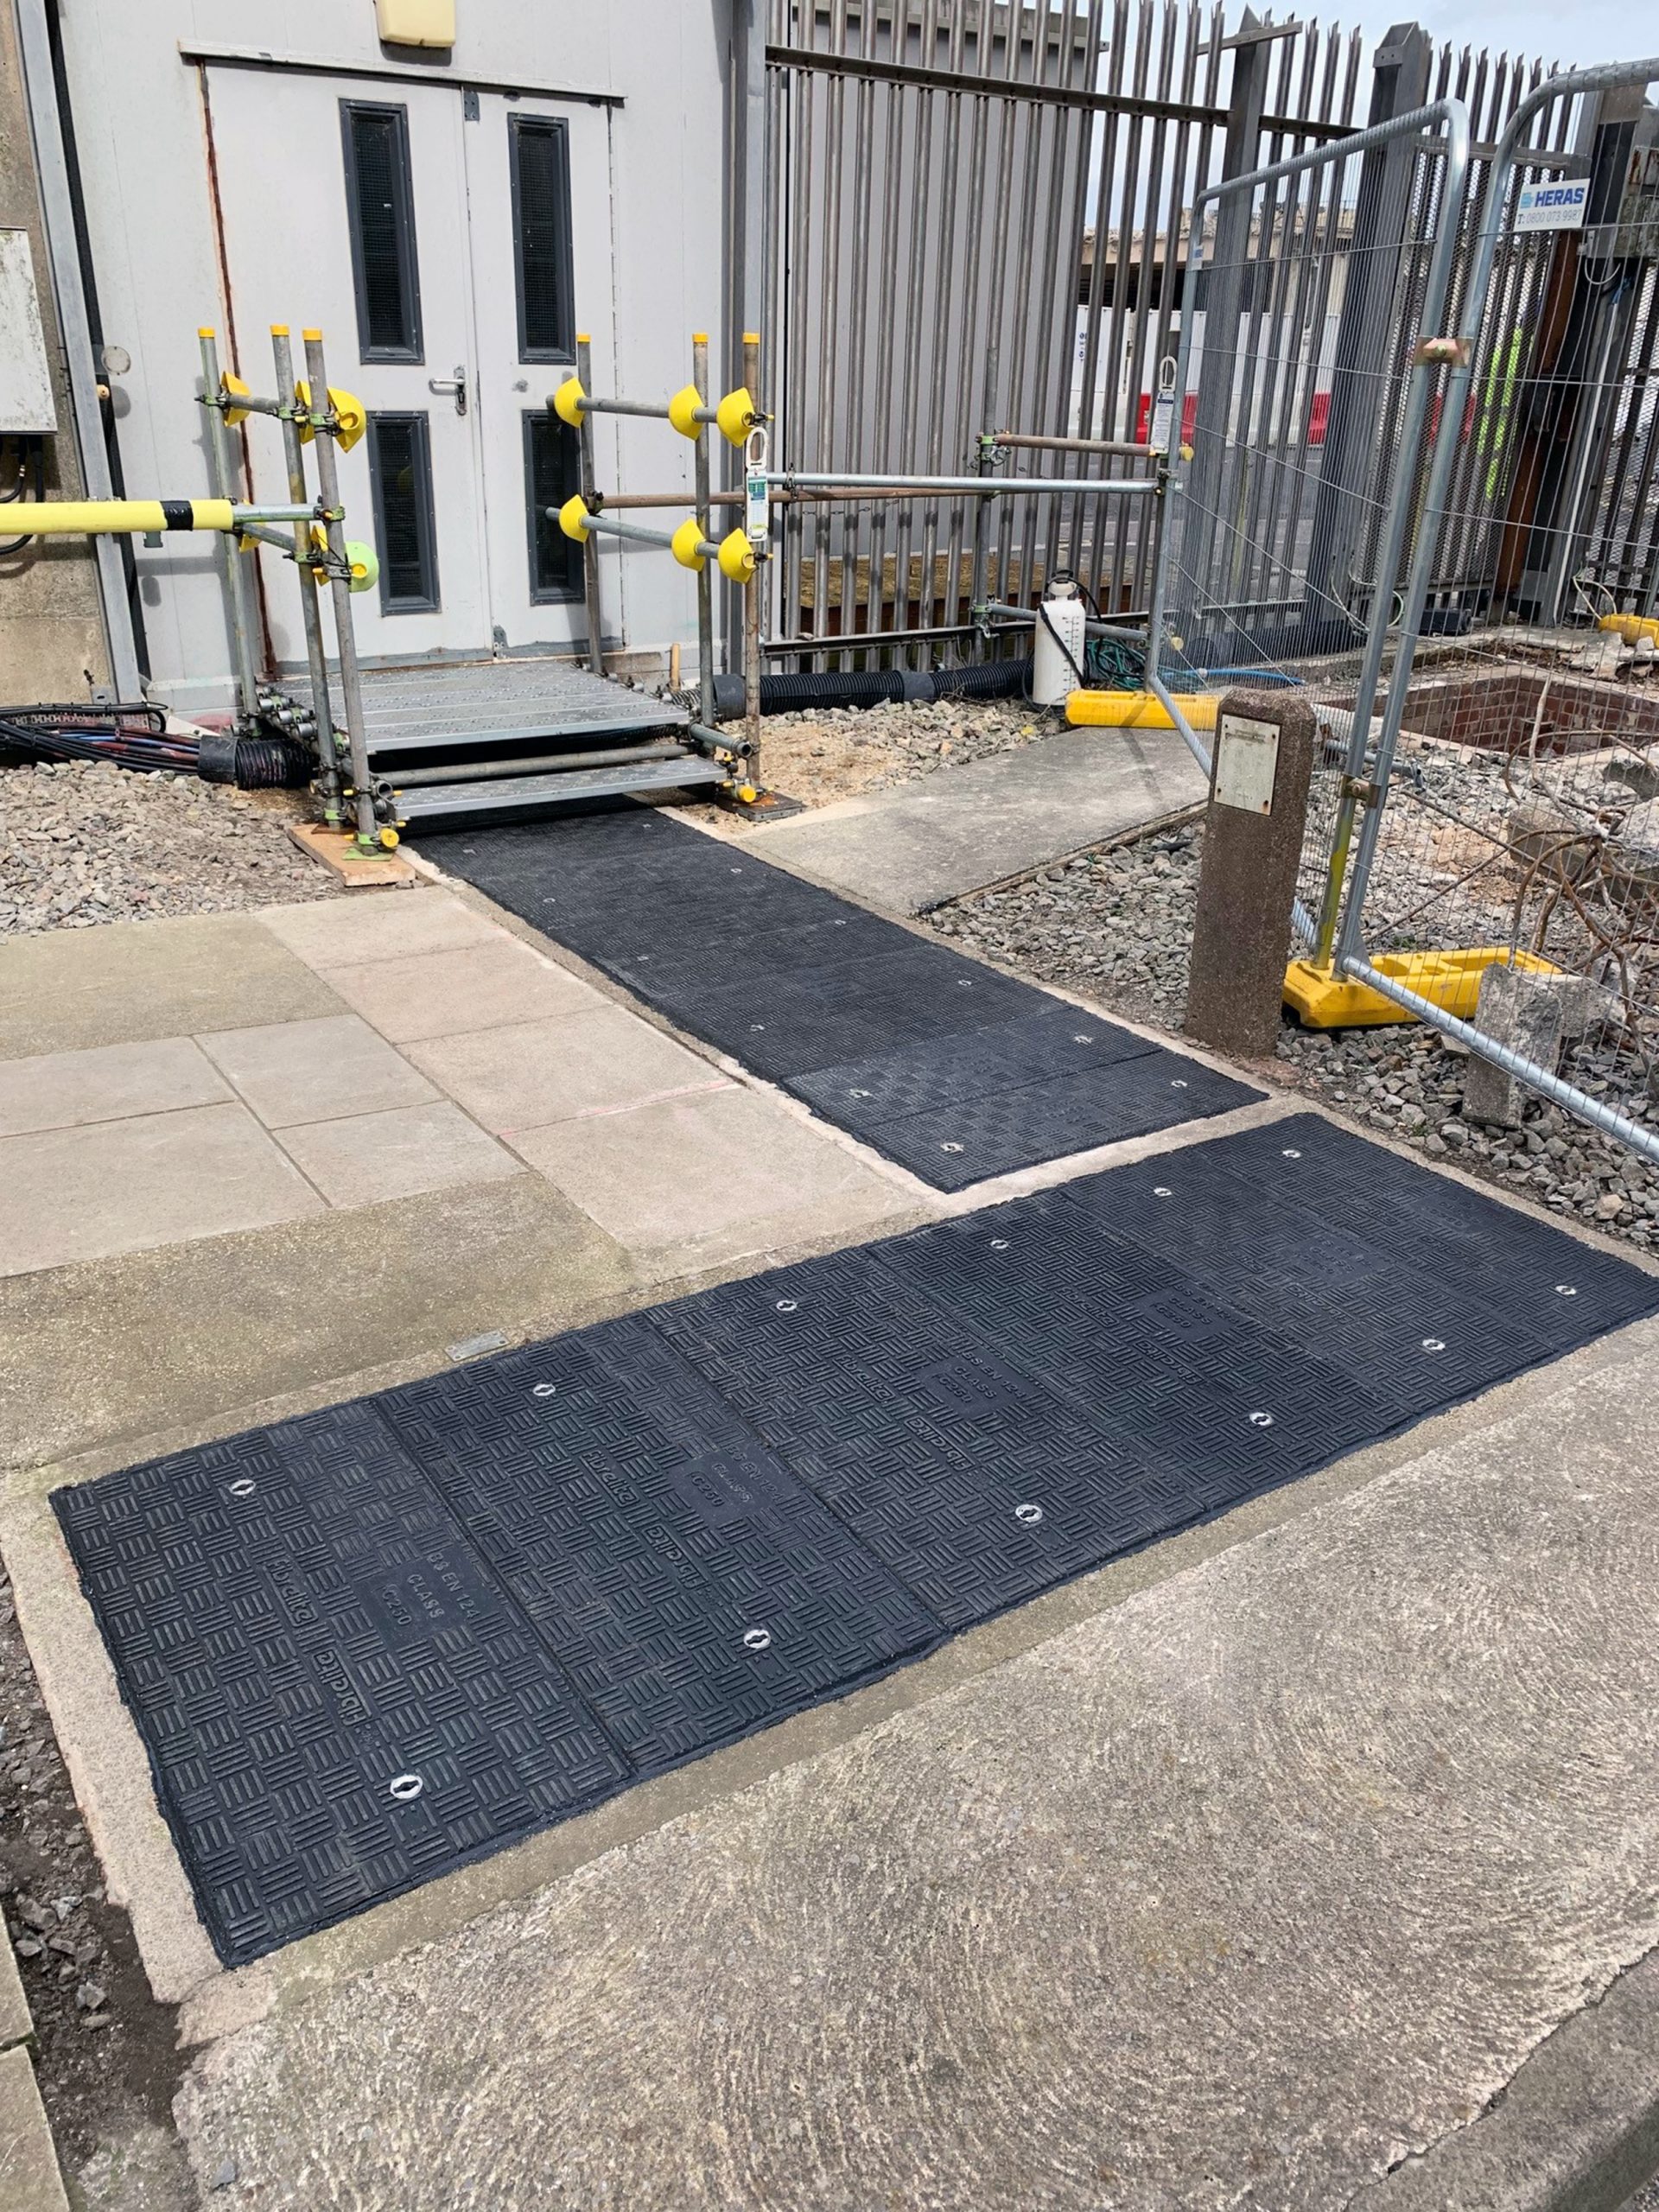 Fibrelite engineered bespoke retrofit FRP GRP trench covers for the Hinkley Point (A) Nuclear Power Station, currently under decommissioning